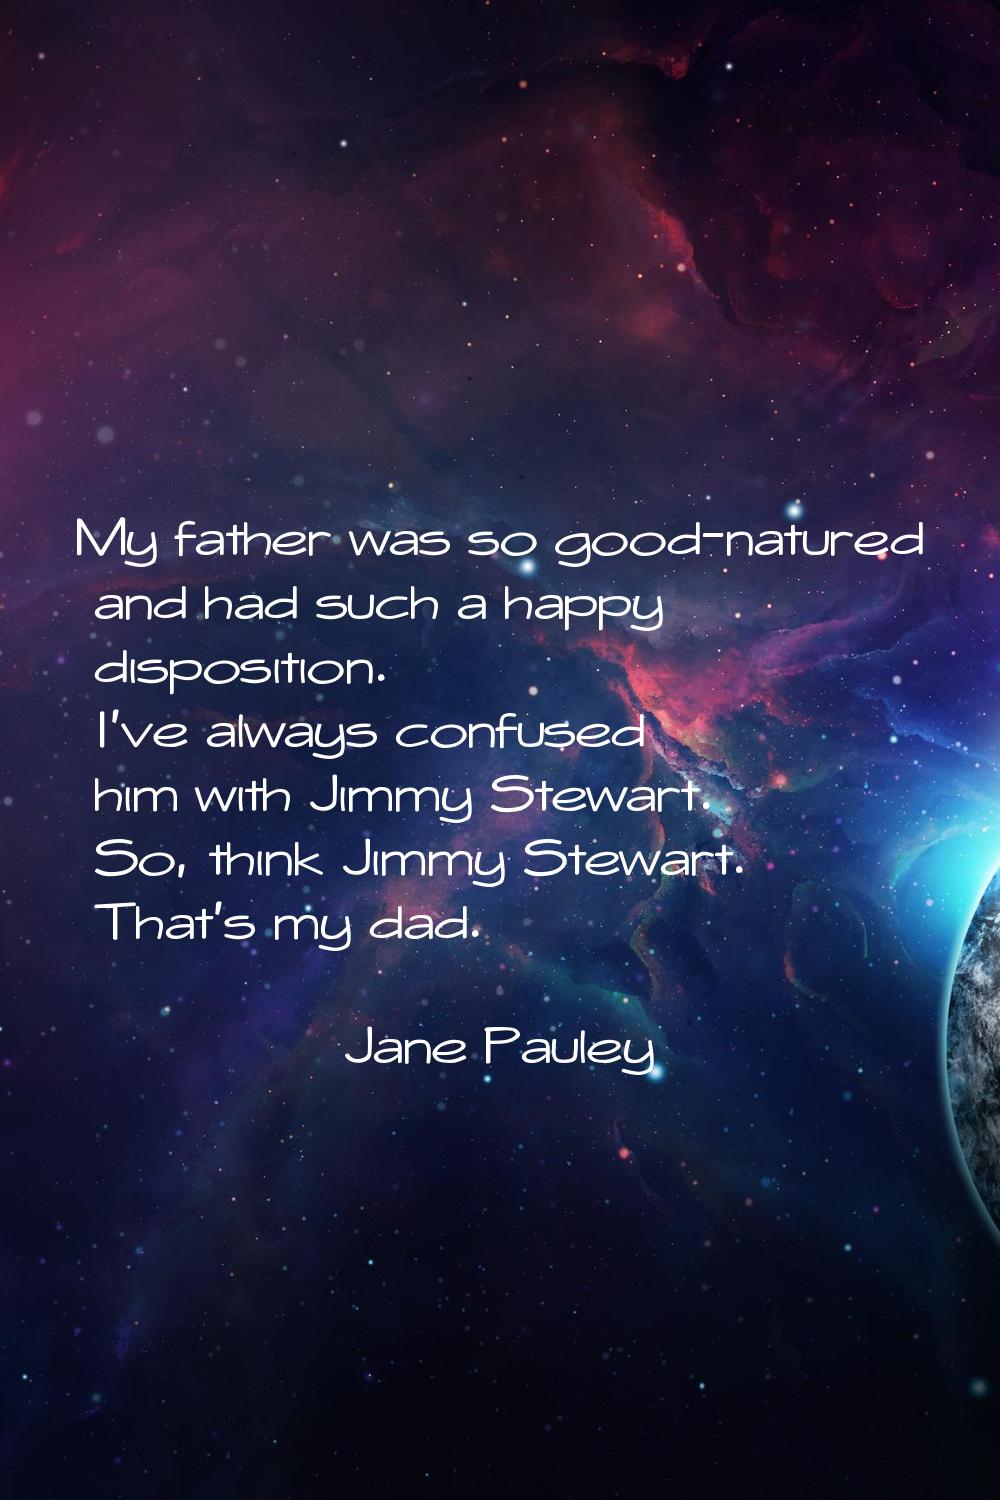 My father was so good-natured and had such a happy disposition. I've always confused him with Jimmy